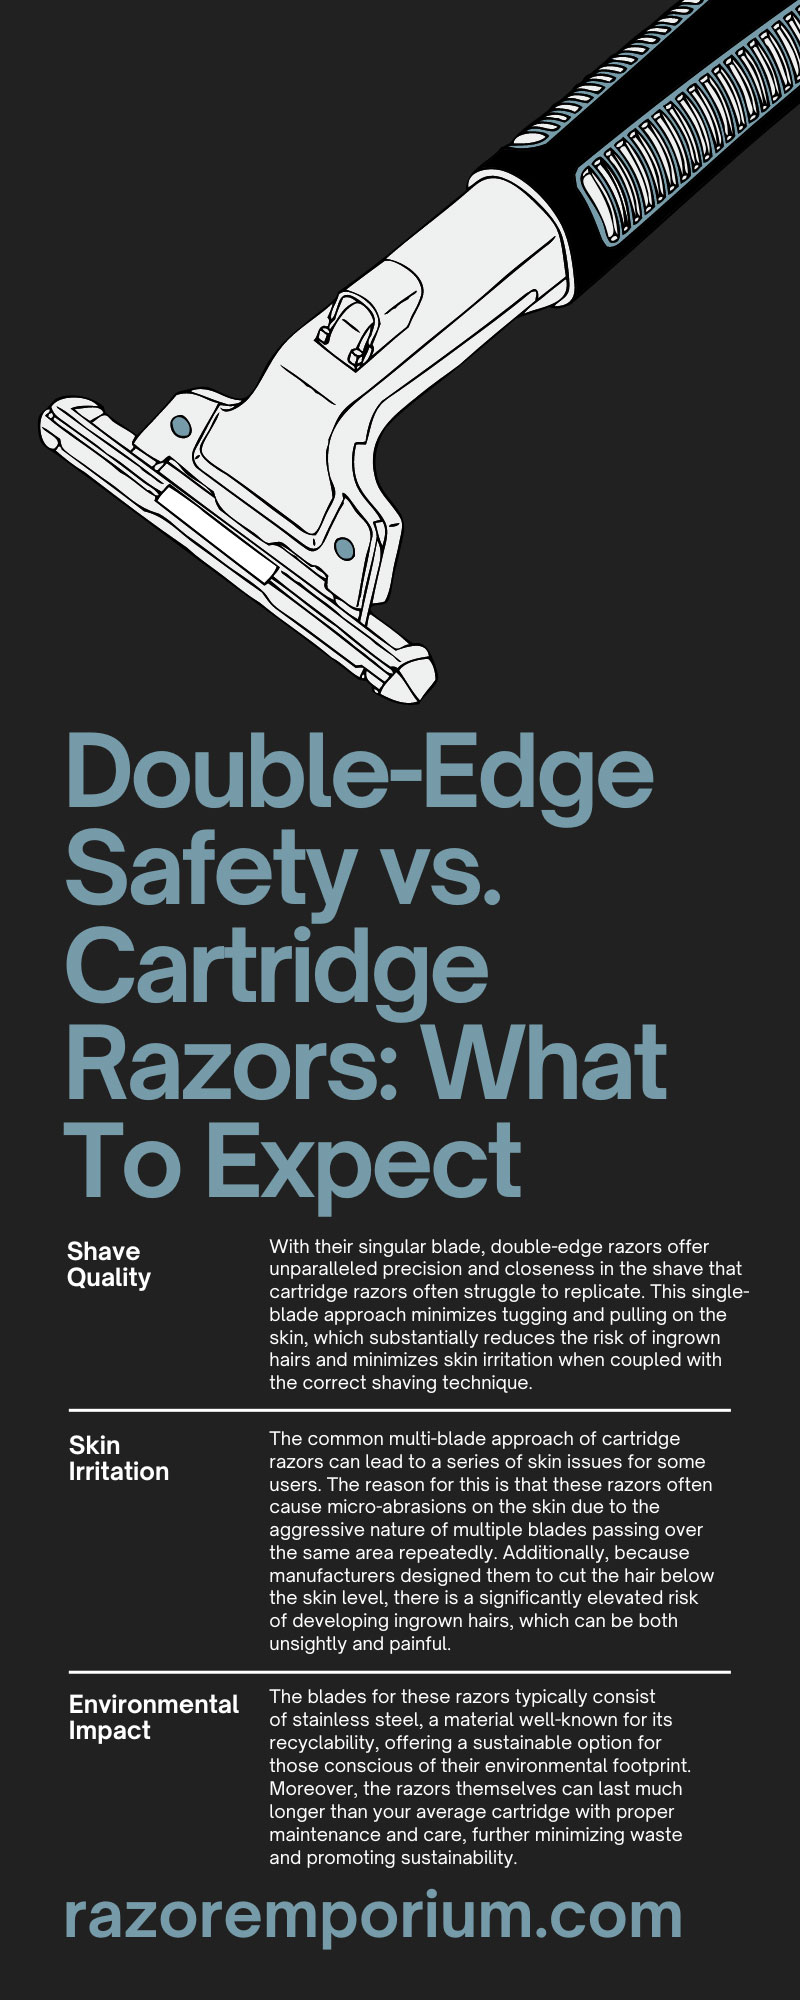 Double-Edge Safety vs. Cartridge Razors: What To Expect